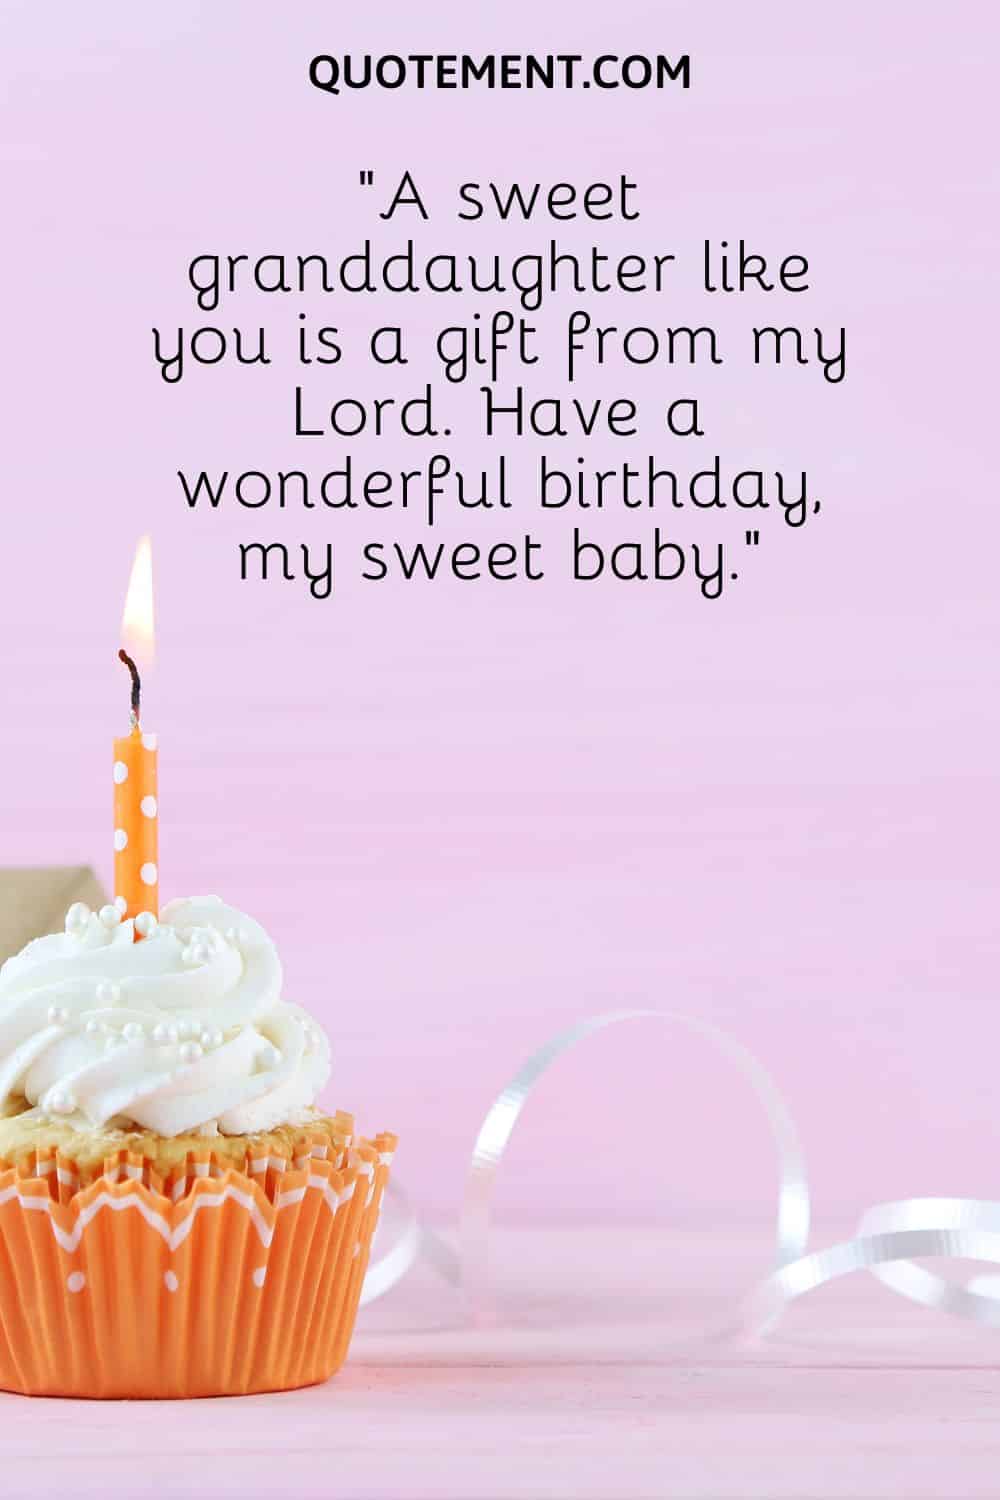 Granddaughter birthday quotes